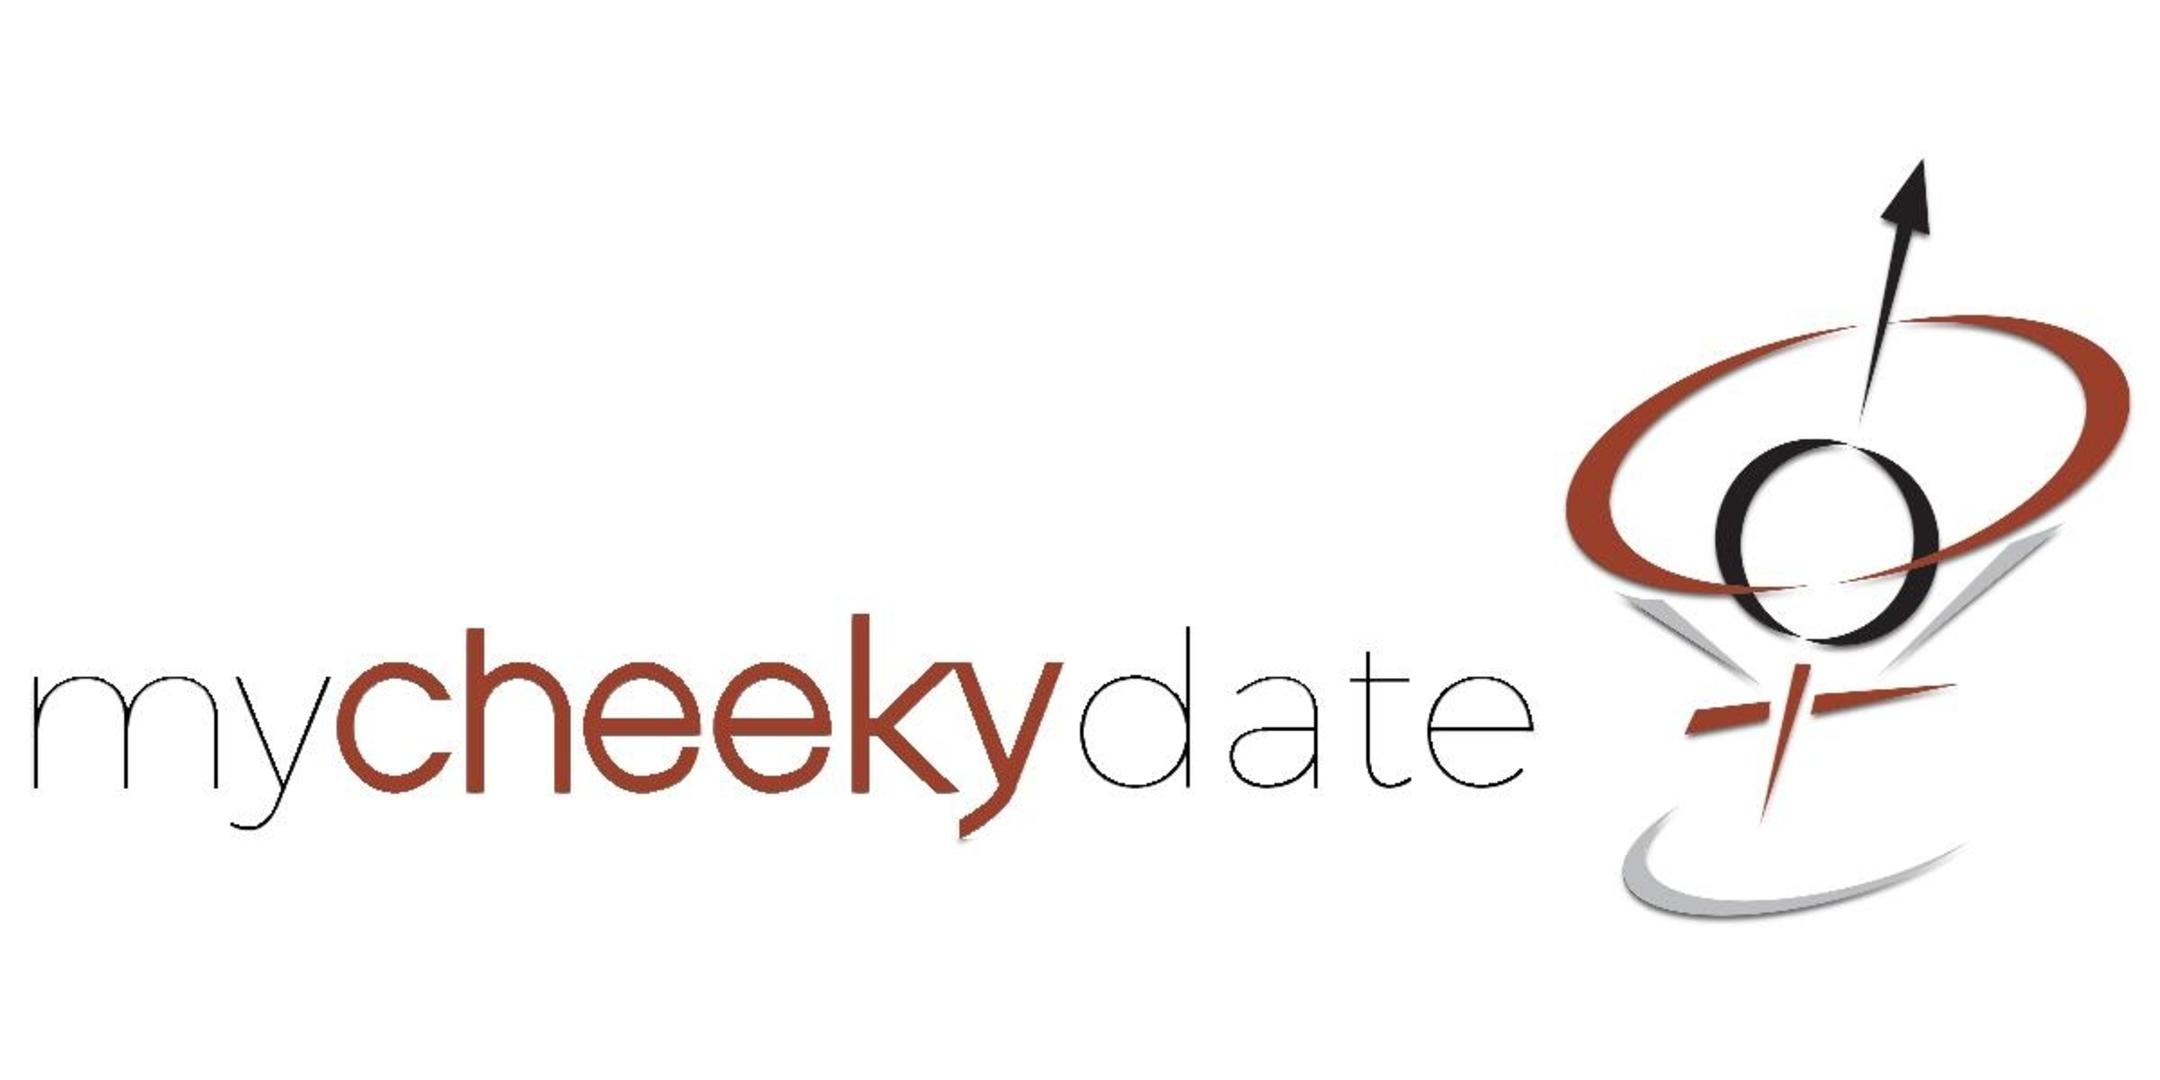 Speed Dating | Singles Event in Vancouver | Let's Get Cheeky!